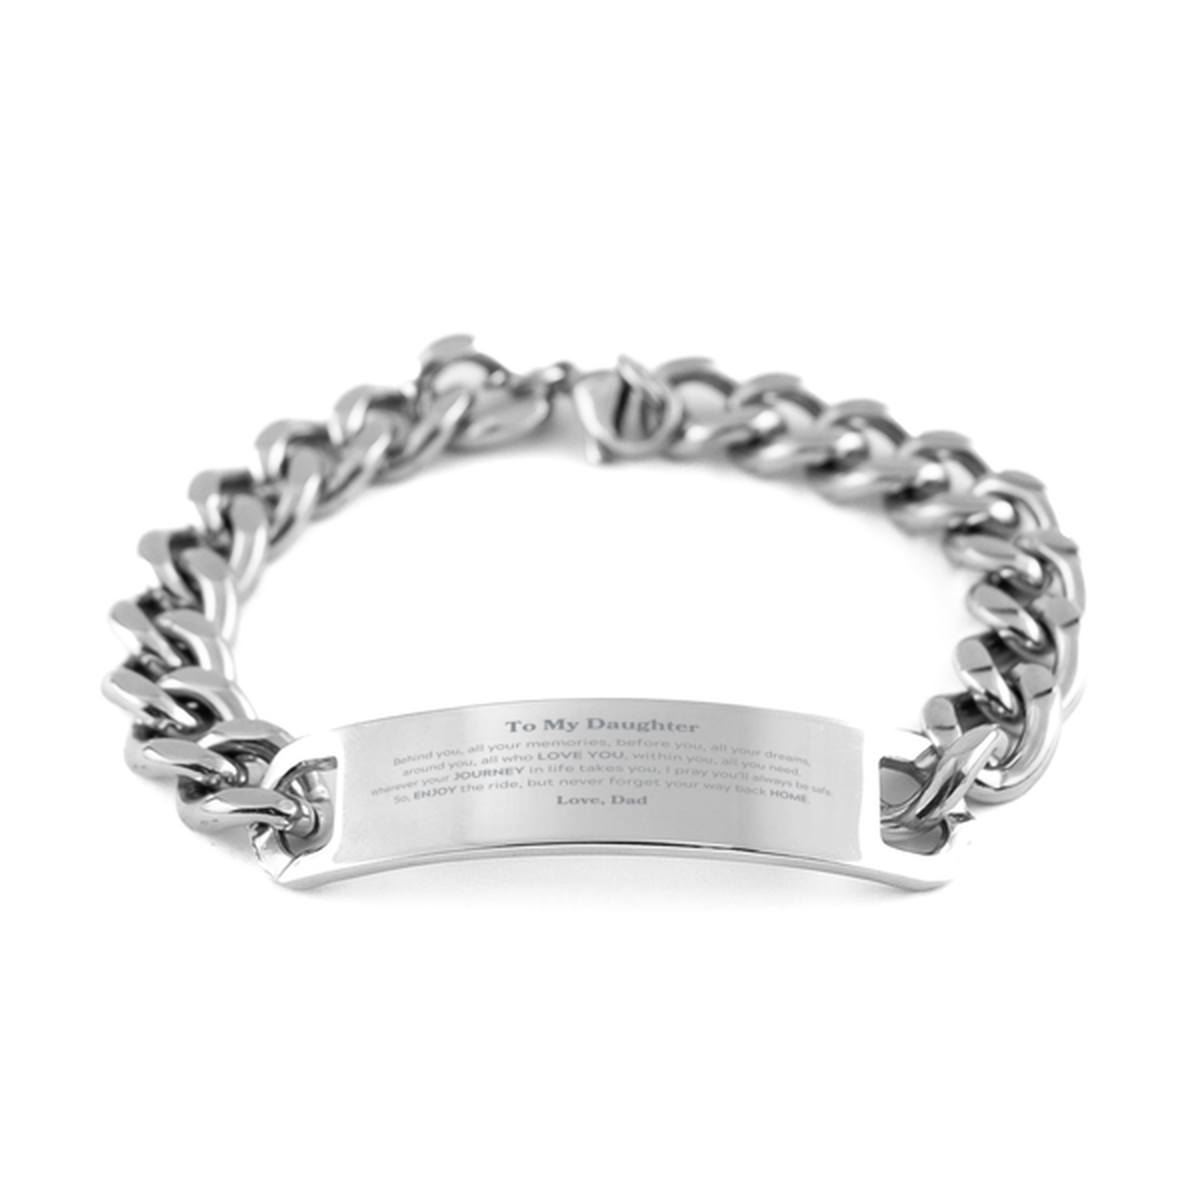 To My Daughter Graduation Gifts from Dad, Daughter Cuban Chain Stainless Steel Bracelet Christmas Birthday Gifts for Daughter Behind you, all your memories, before you, all your dreams. Love, Dad